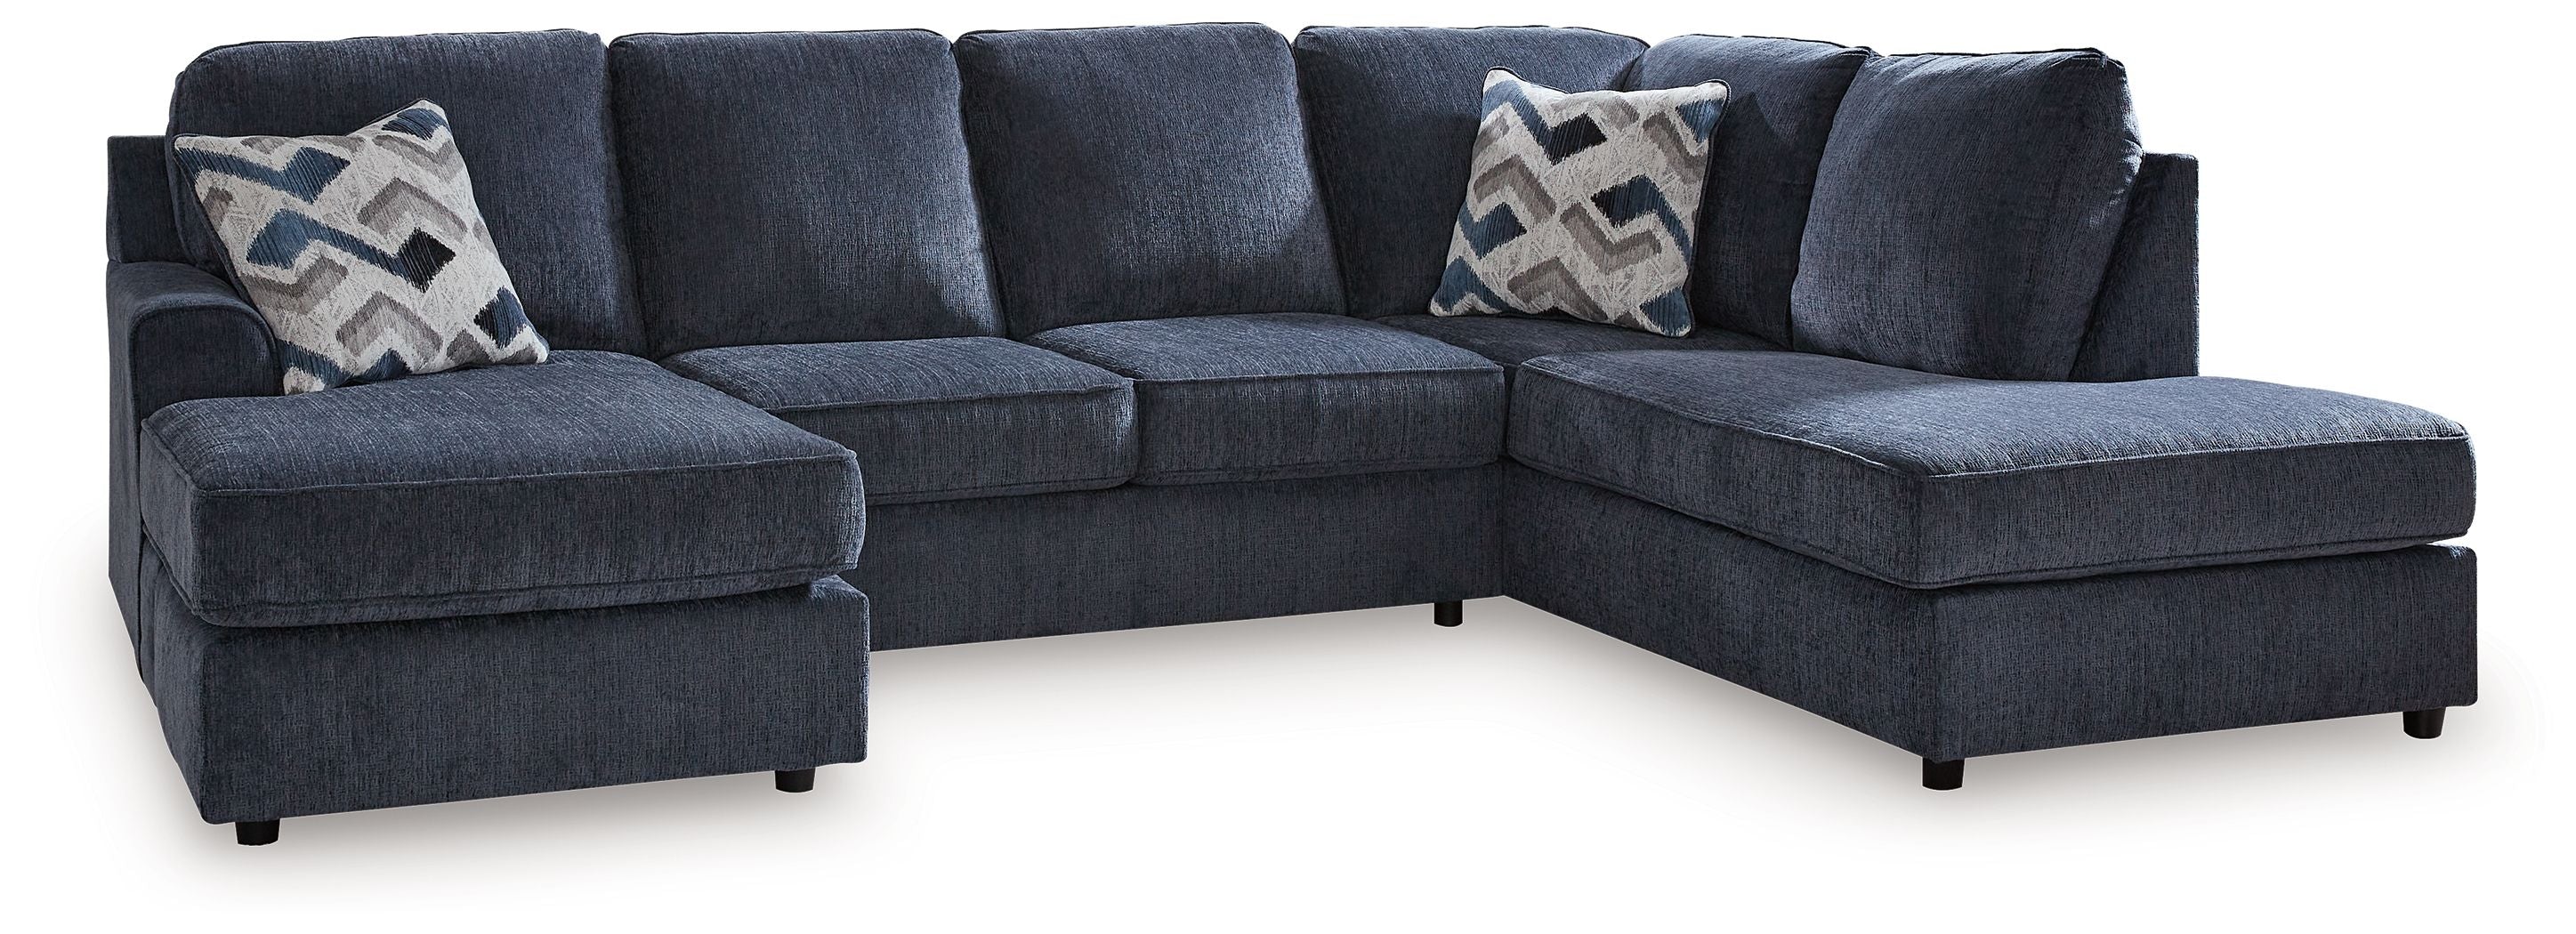 Albar Place - Sectional-Stationary Sectionals-American Furniture Outlet